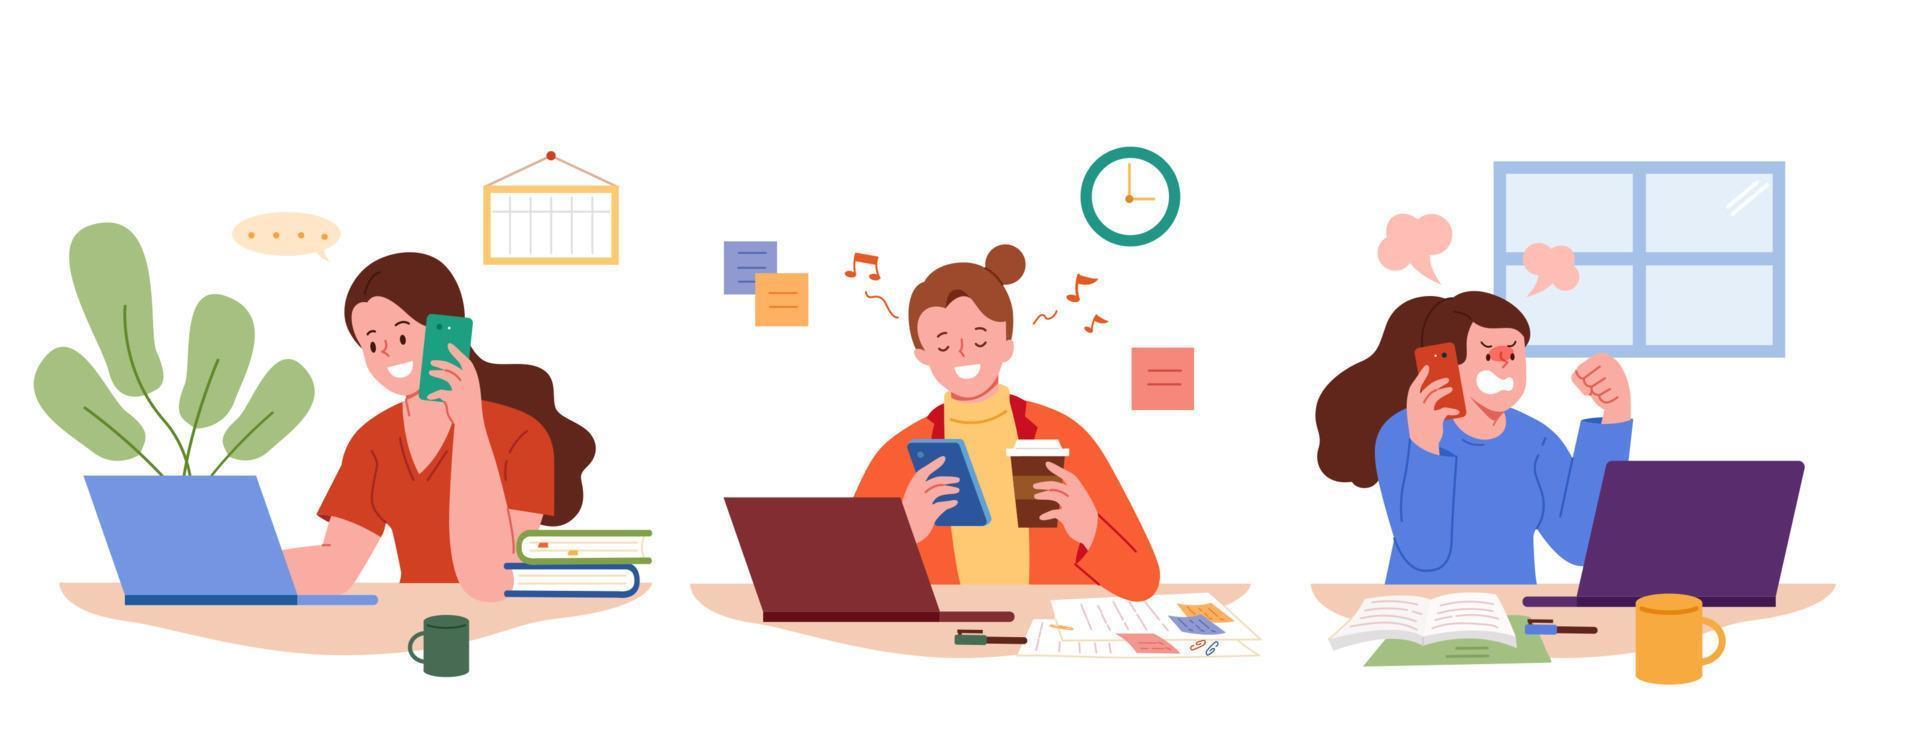 Set of female employees working at the office desk using mobile phones. Flat illustration of women with different expressions at workplace while working in office. vector